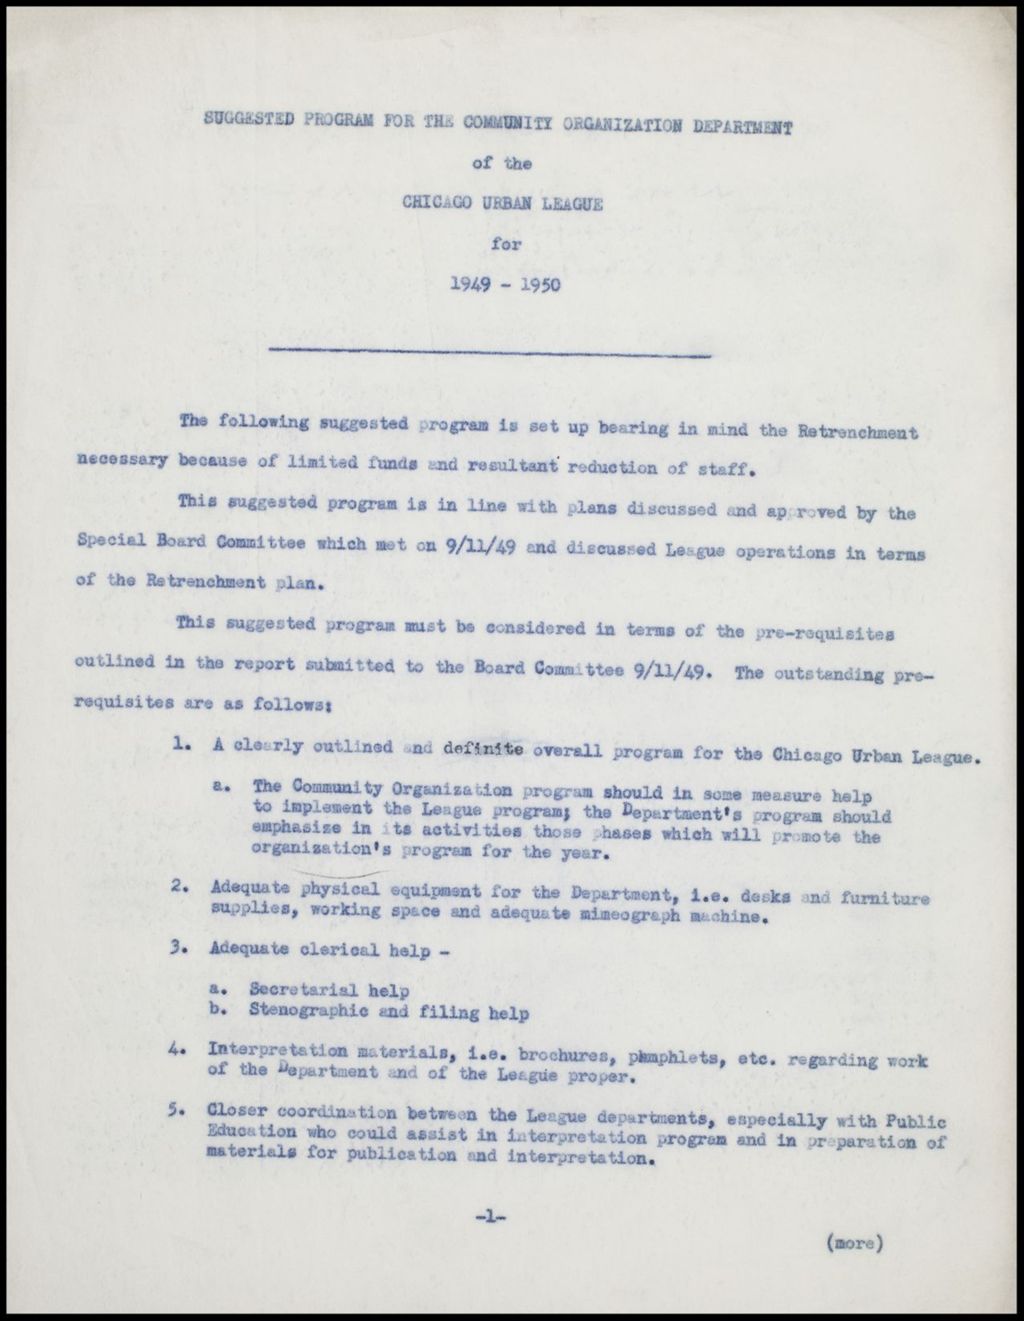 Proposed Programs and Highlights of Post Programs, 1949-1954 (Folder II-2177)